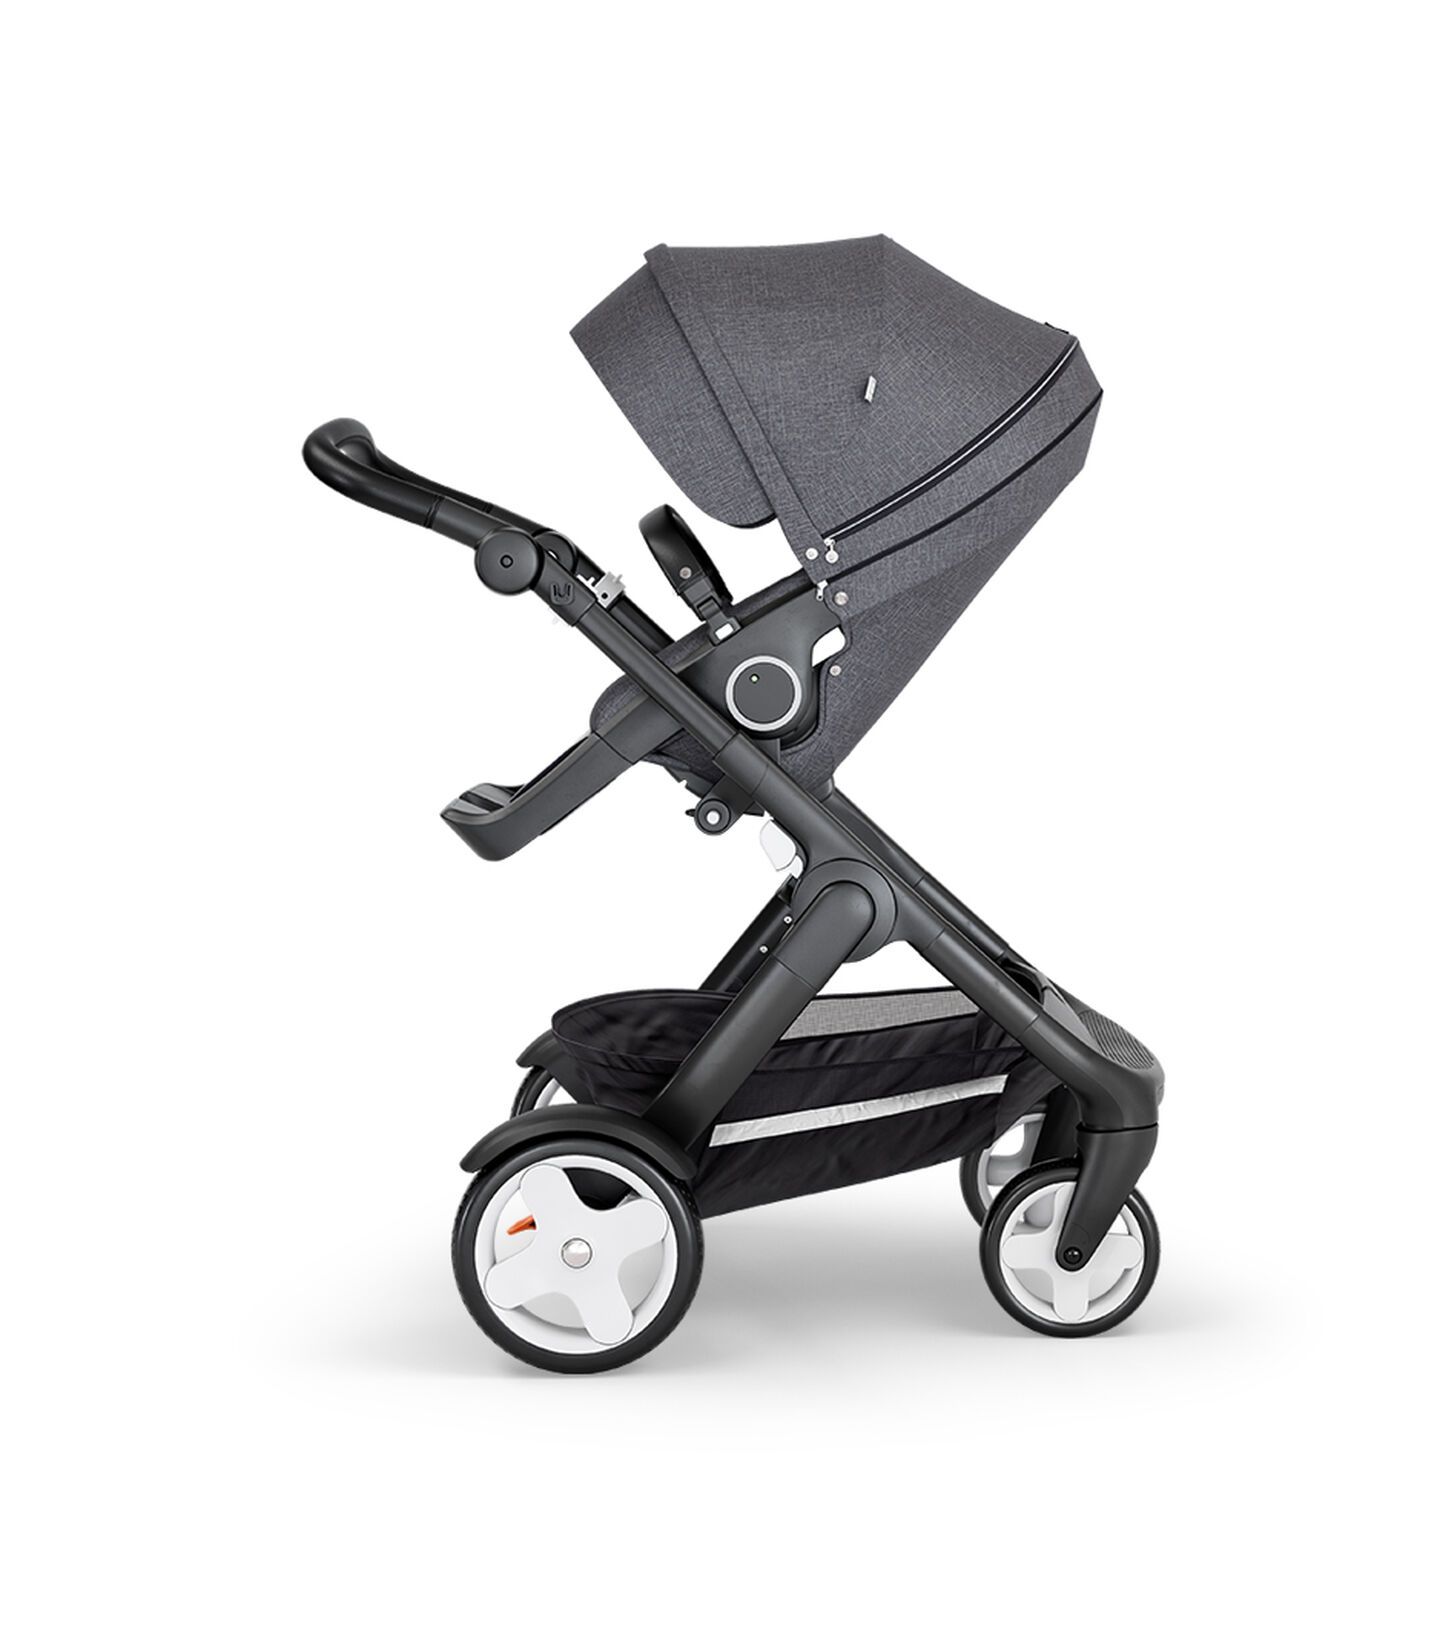 Stokke® Trailz™ with Black Chassis, Black Leatherette and Classic Wheels. Stokke® Stroller Seat, Black Melange. view 1